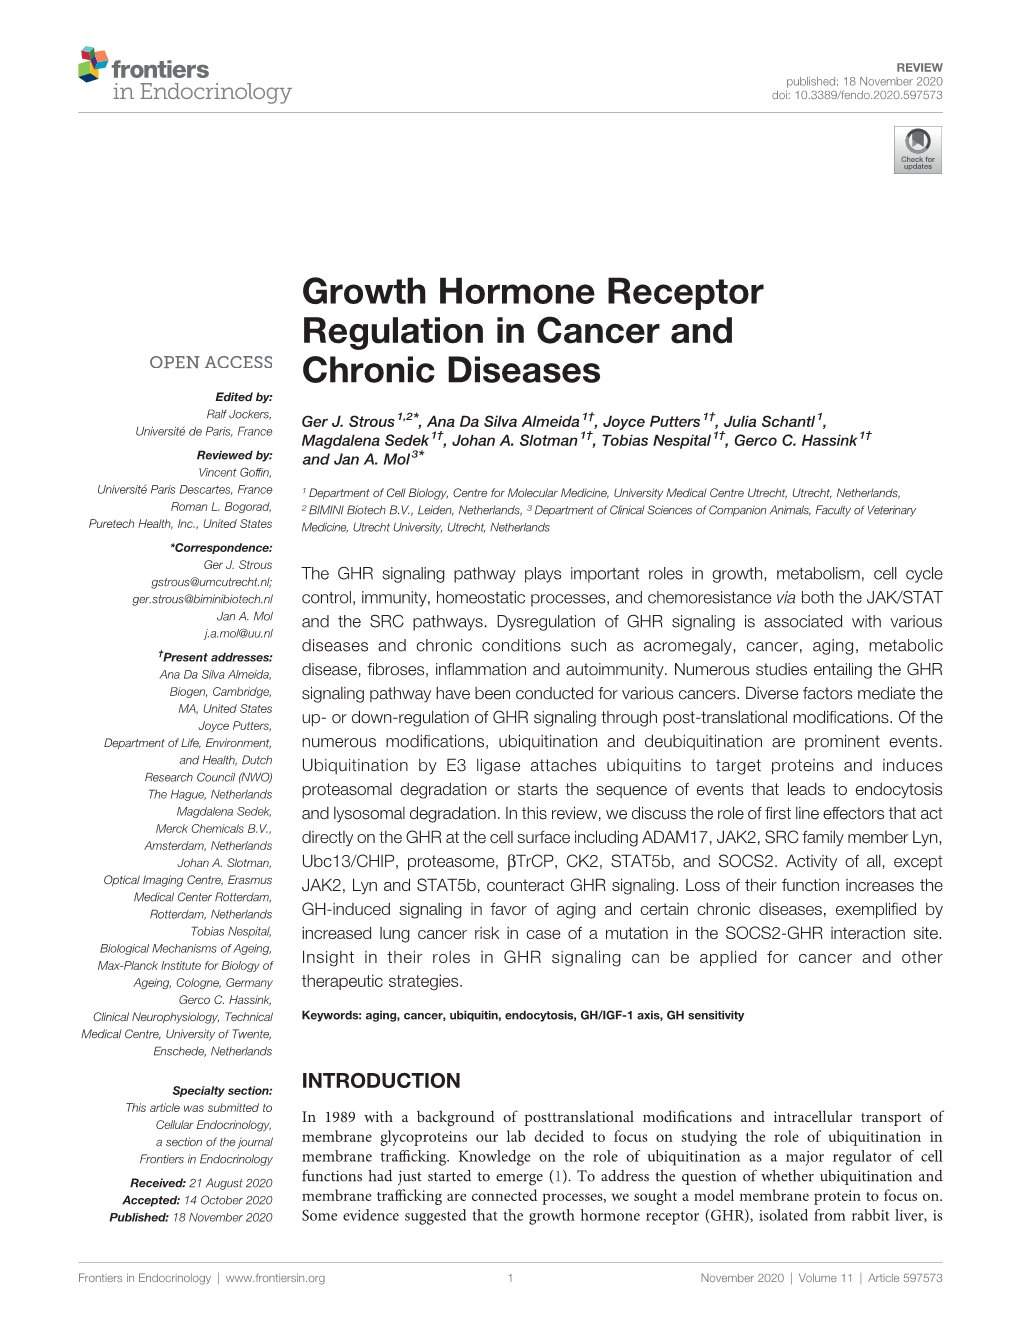 Growth Hormone Receptor Regulation in Cancer and Chronic Diseases Edited By: † † Ralf Jockers, Ger J